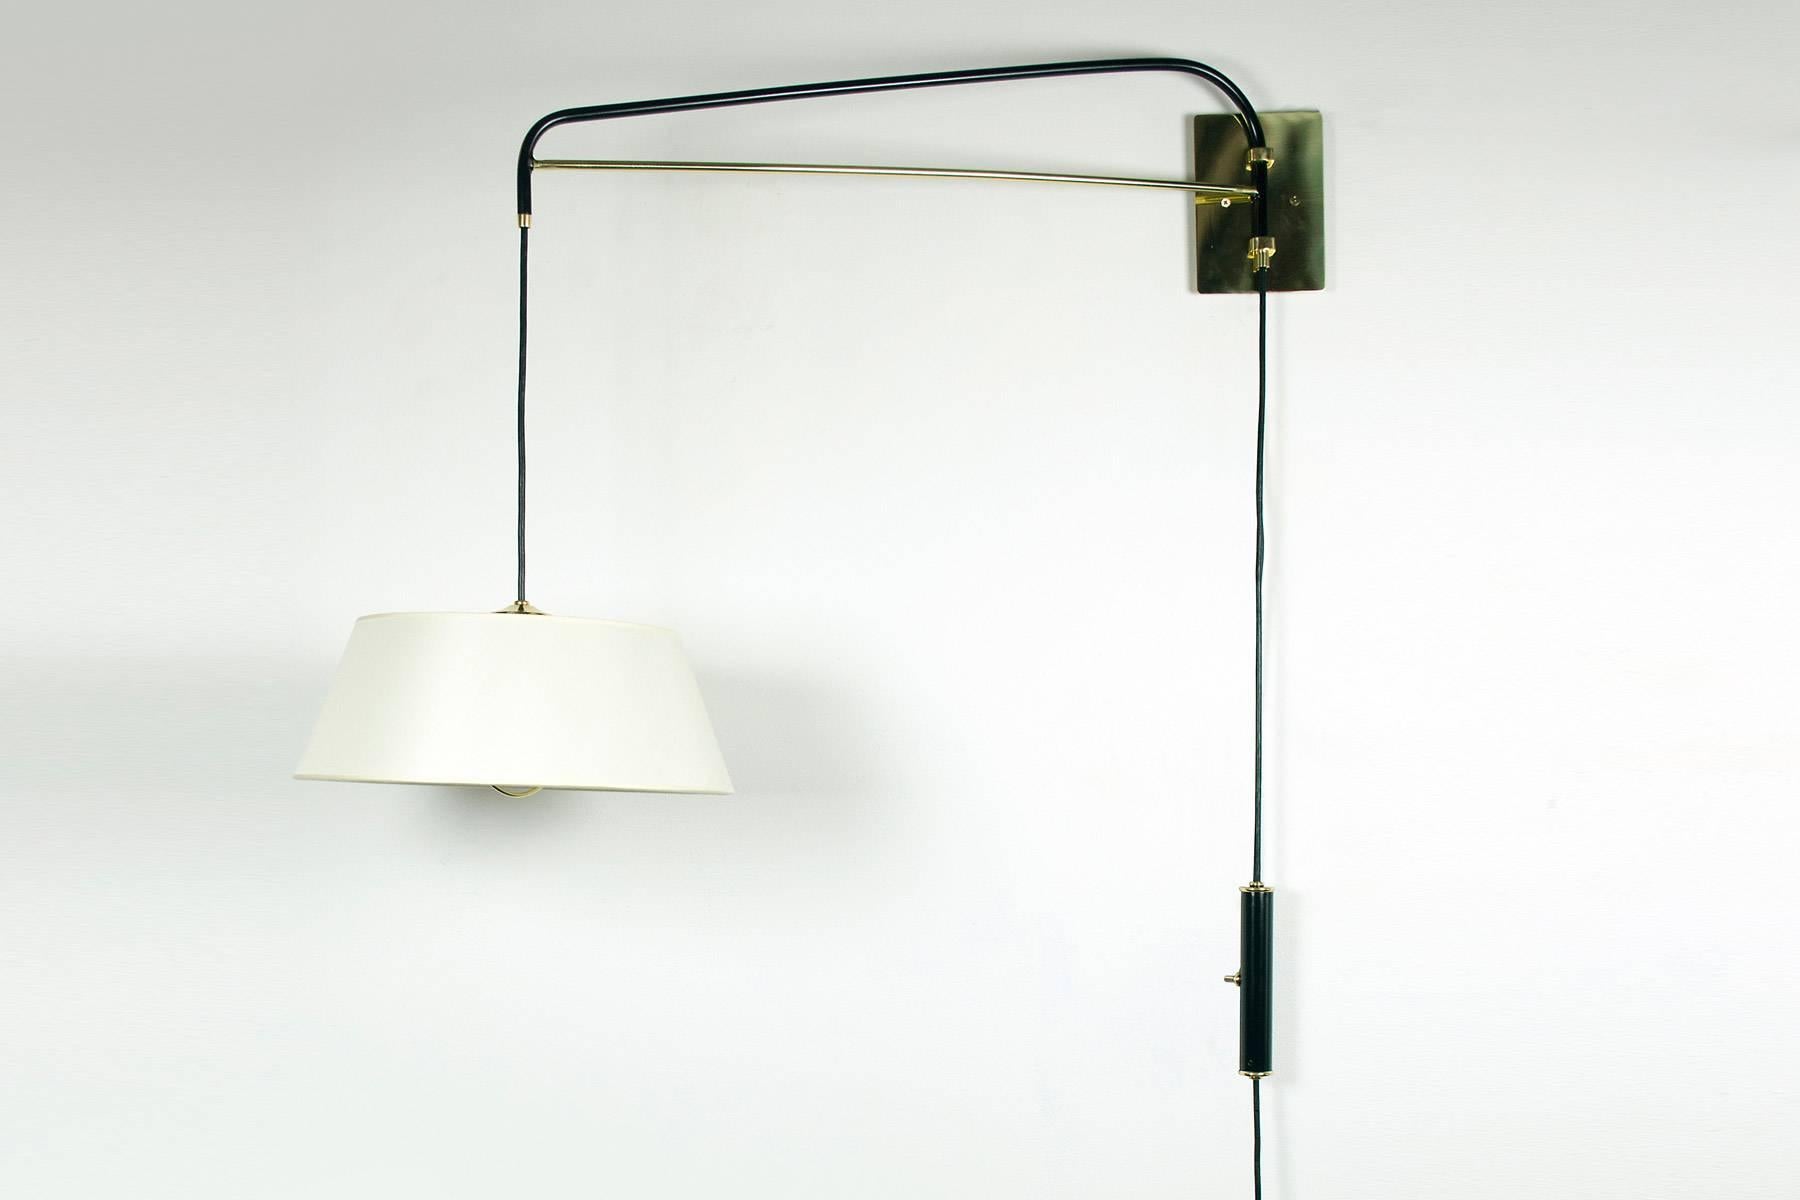 These graceful wall sconces are handcrafted by Bourgeois Boheme Atelier. They are made with a black enamel finish and polished brass. An elegant linen shade diffuses a soft light. These fixture are adjustable, the switched counter weight system